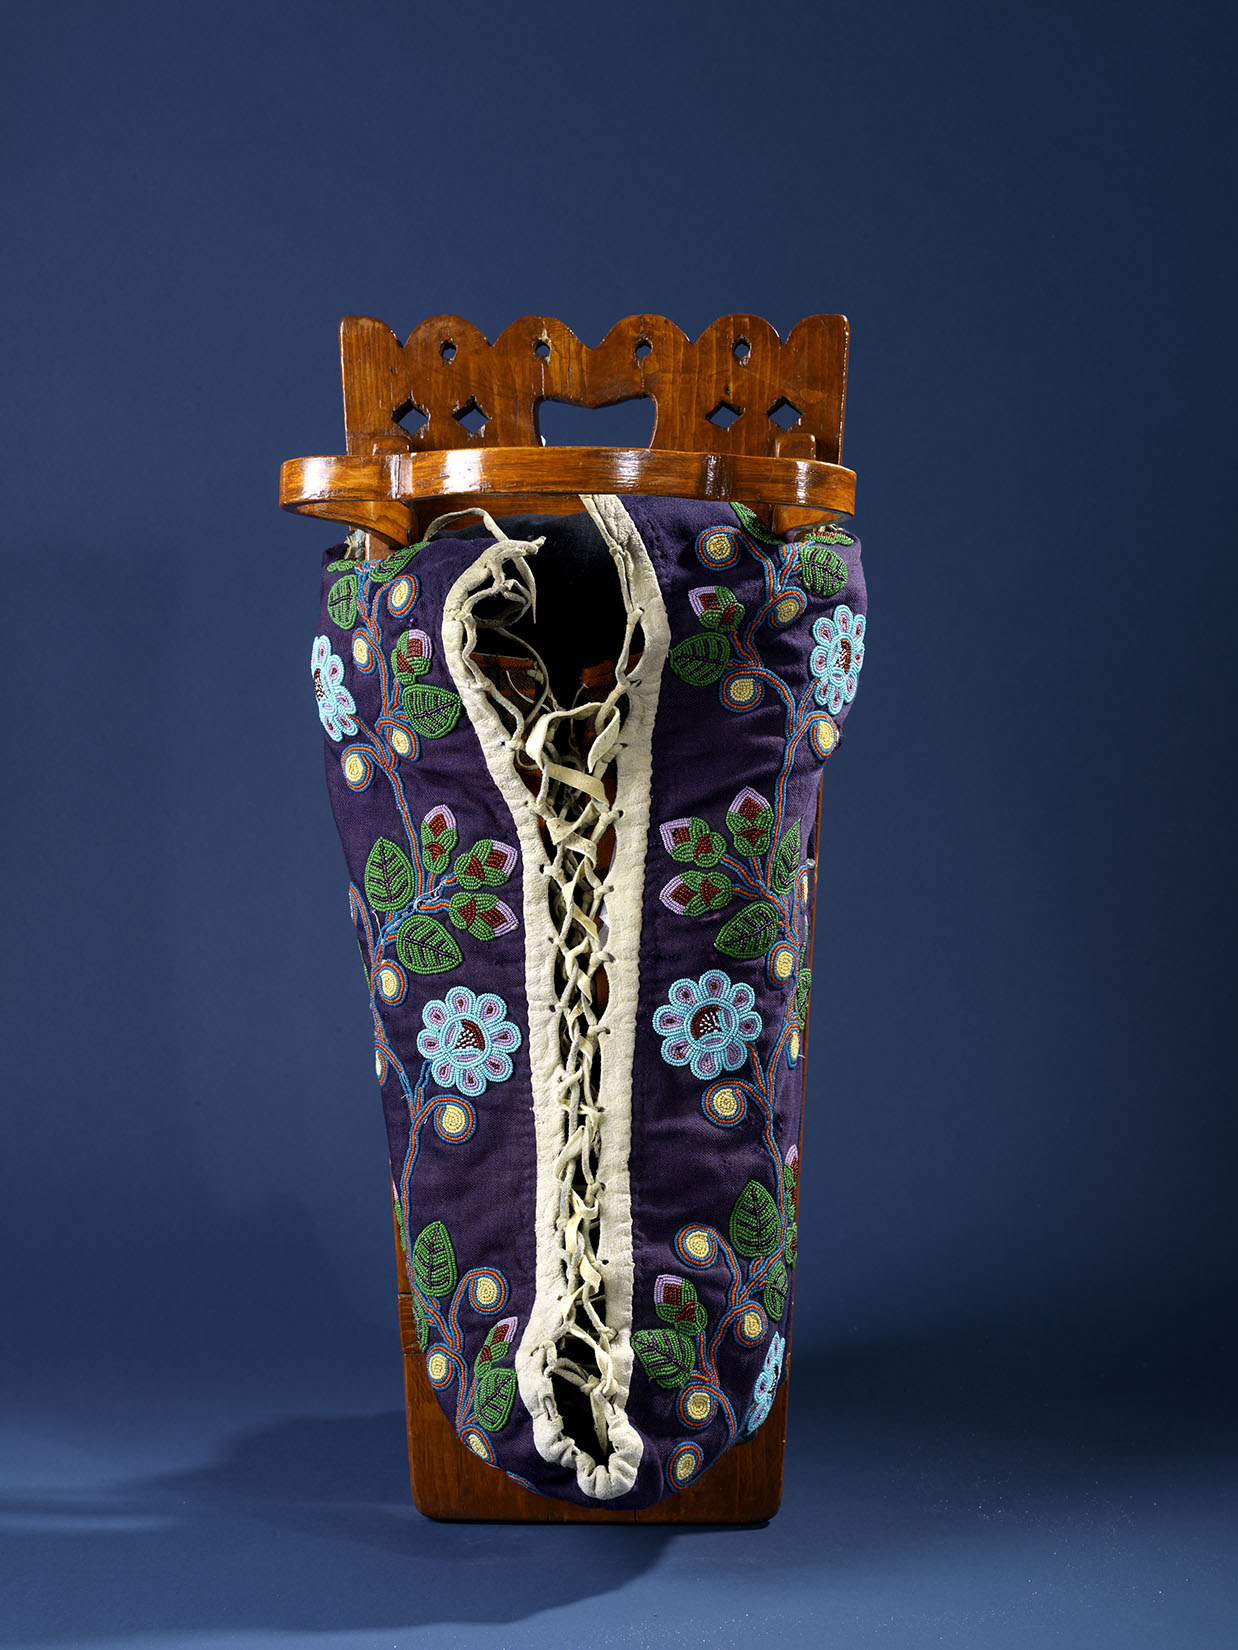 Cradleboard and moss bag with a varnished wood frame. The fabric of the moss bag where the baby is held is a deep purple-blue, decorated with a beaded pattern of light blue, purple and green flowers and blossoms. Other materials are wood, cotton cloth, glass beads, metal